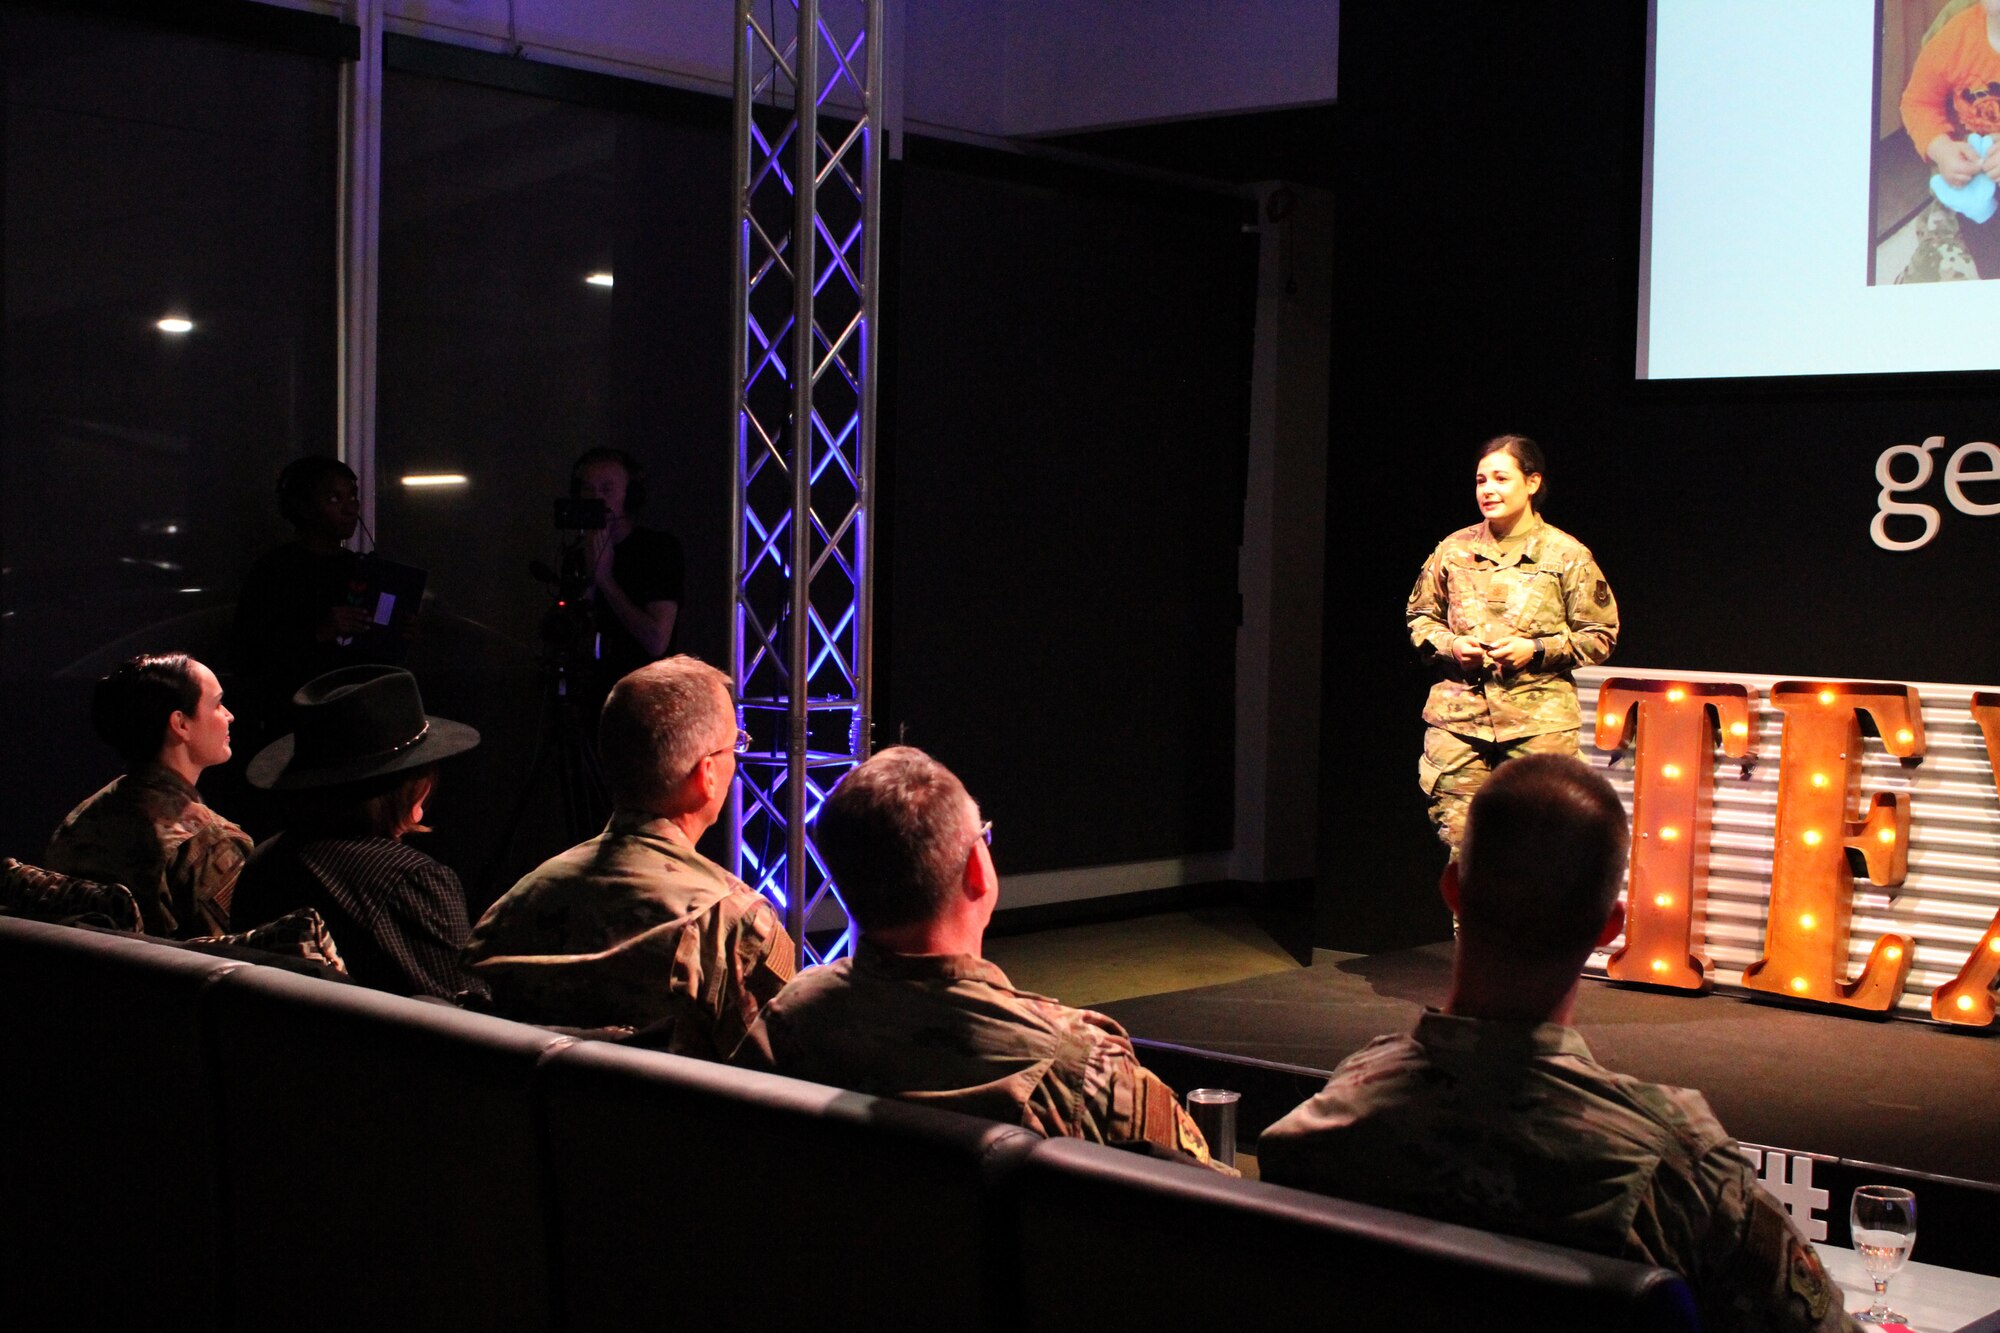 Maj. Jacque Vasta presents her idea for a child care app to senior leaders during the 2020 Air Force Installation and Mission Support Center Innovation Rodeo, Feb. 7, 2020, in San Antonio.